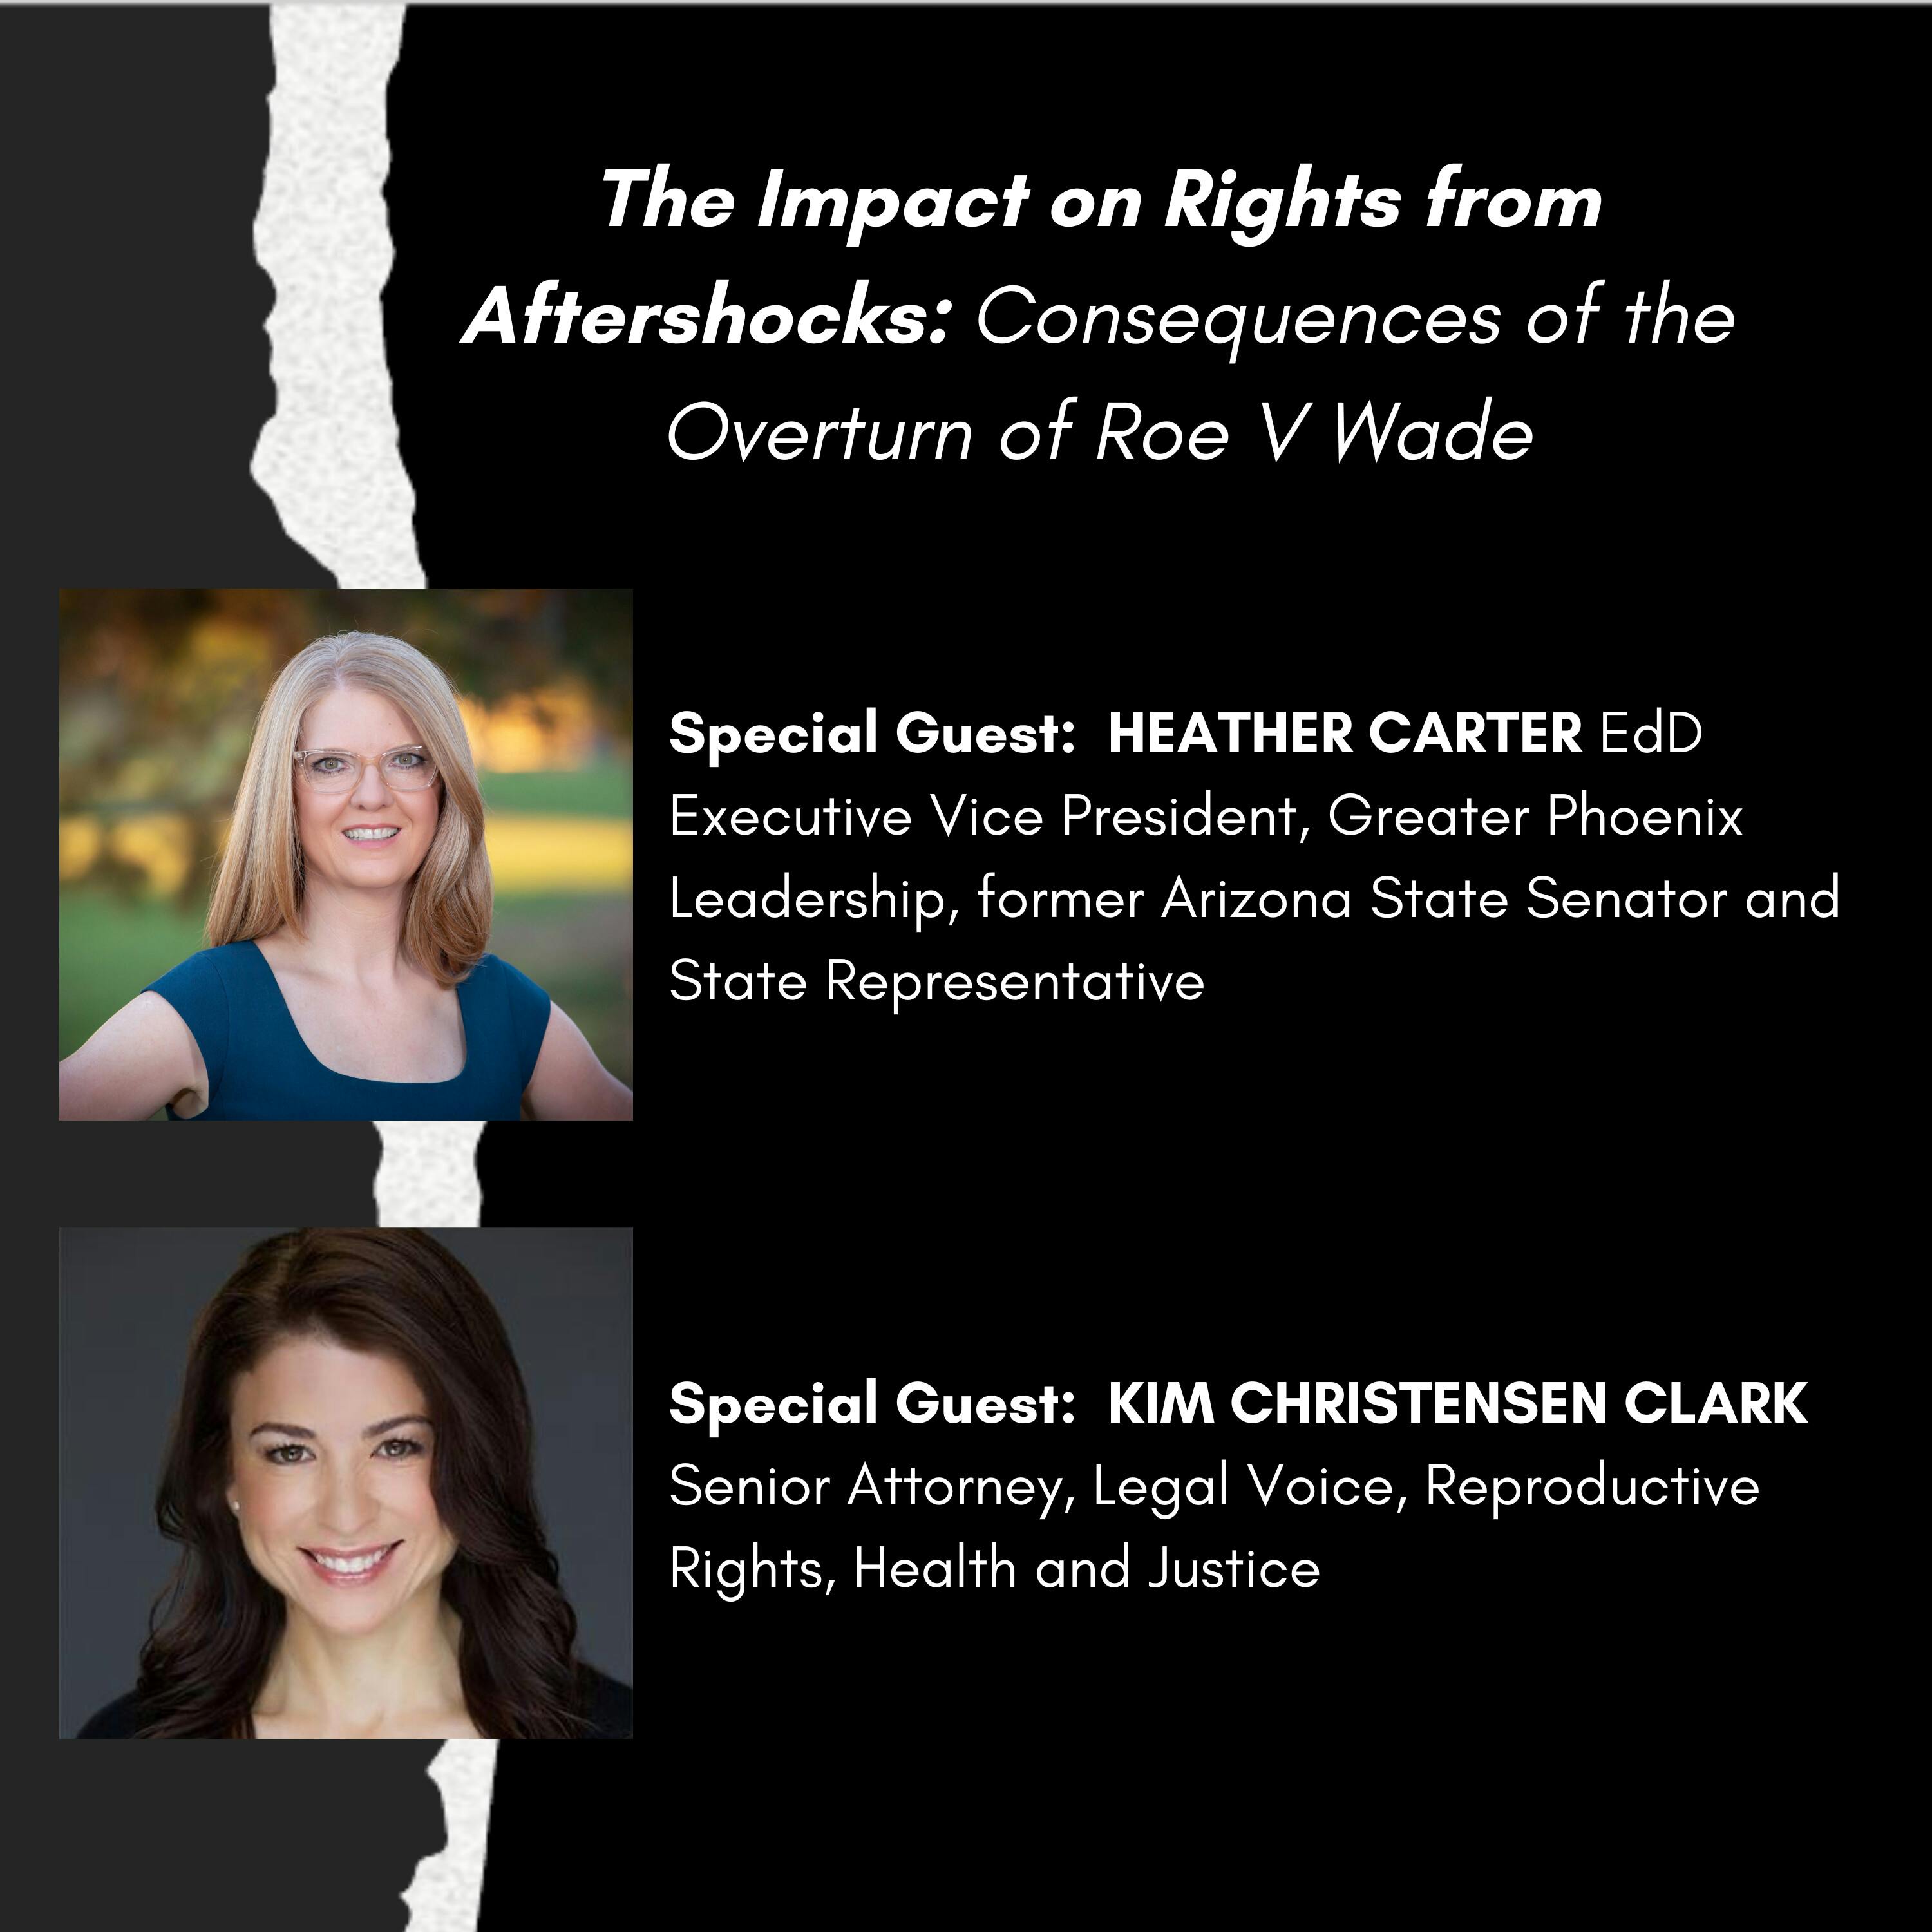 The Impact on Rights from Aftershocks: Consequences of the Overturn of Roe v Wade